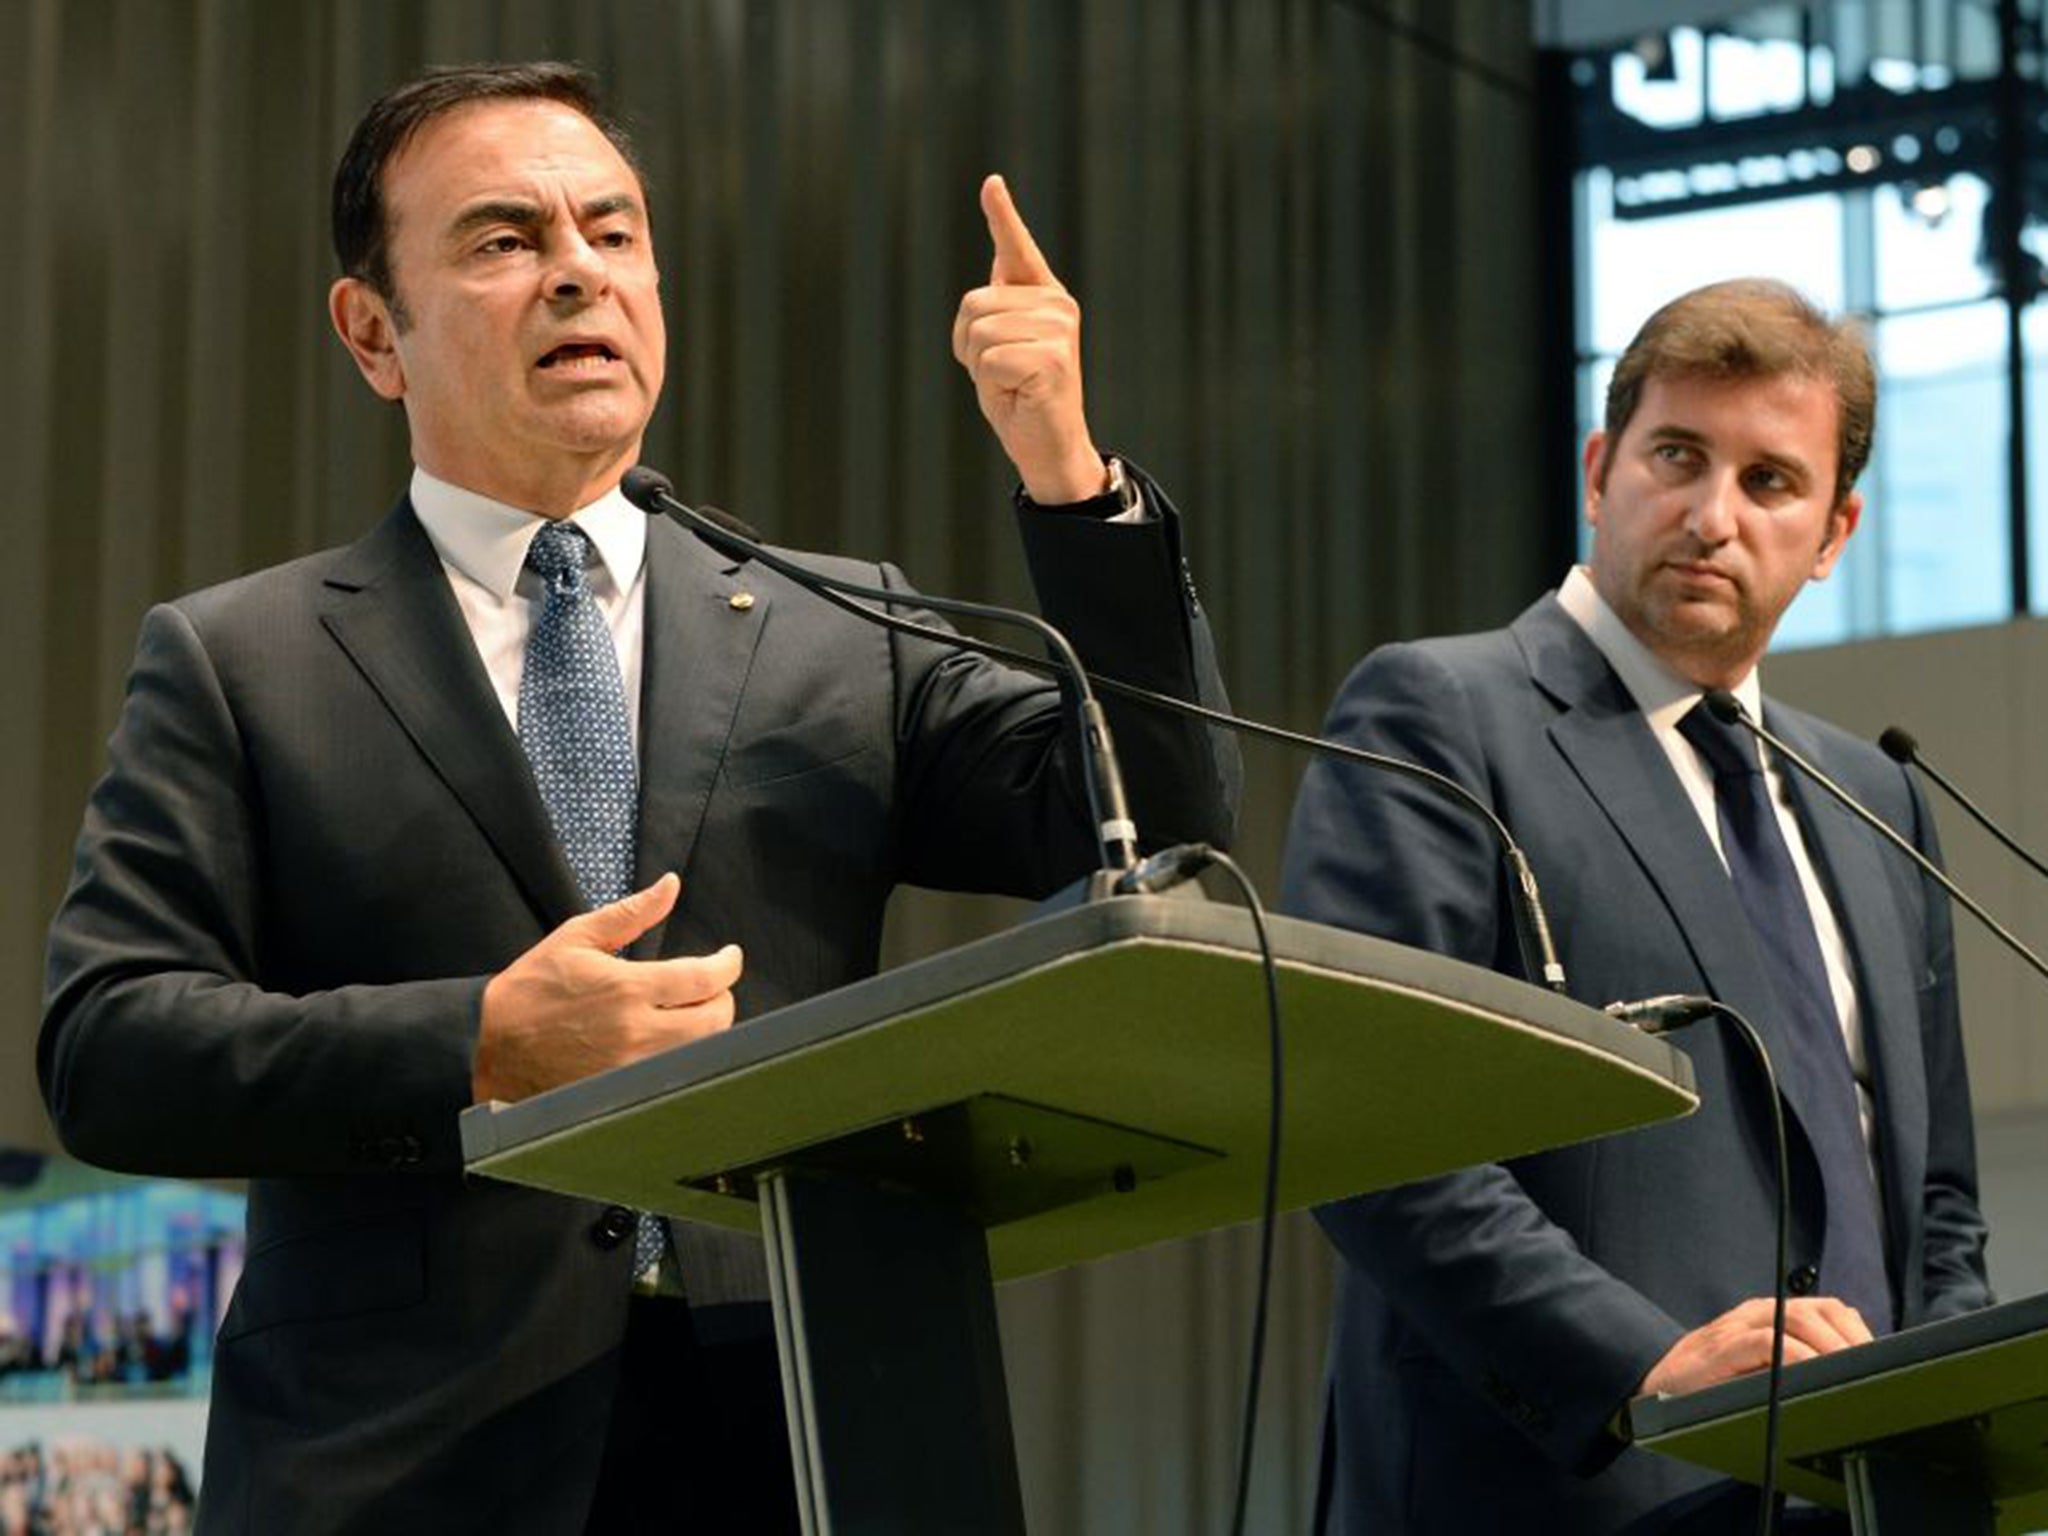 Carlos Ghosn, left, said Renault is unlikely to remain in Formula One as just an engine supplier